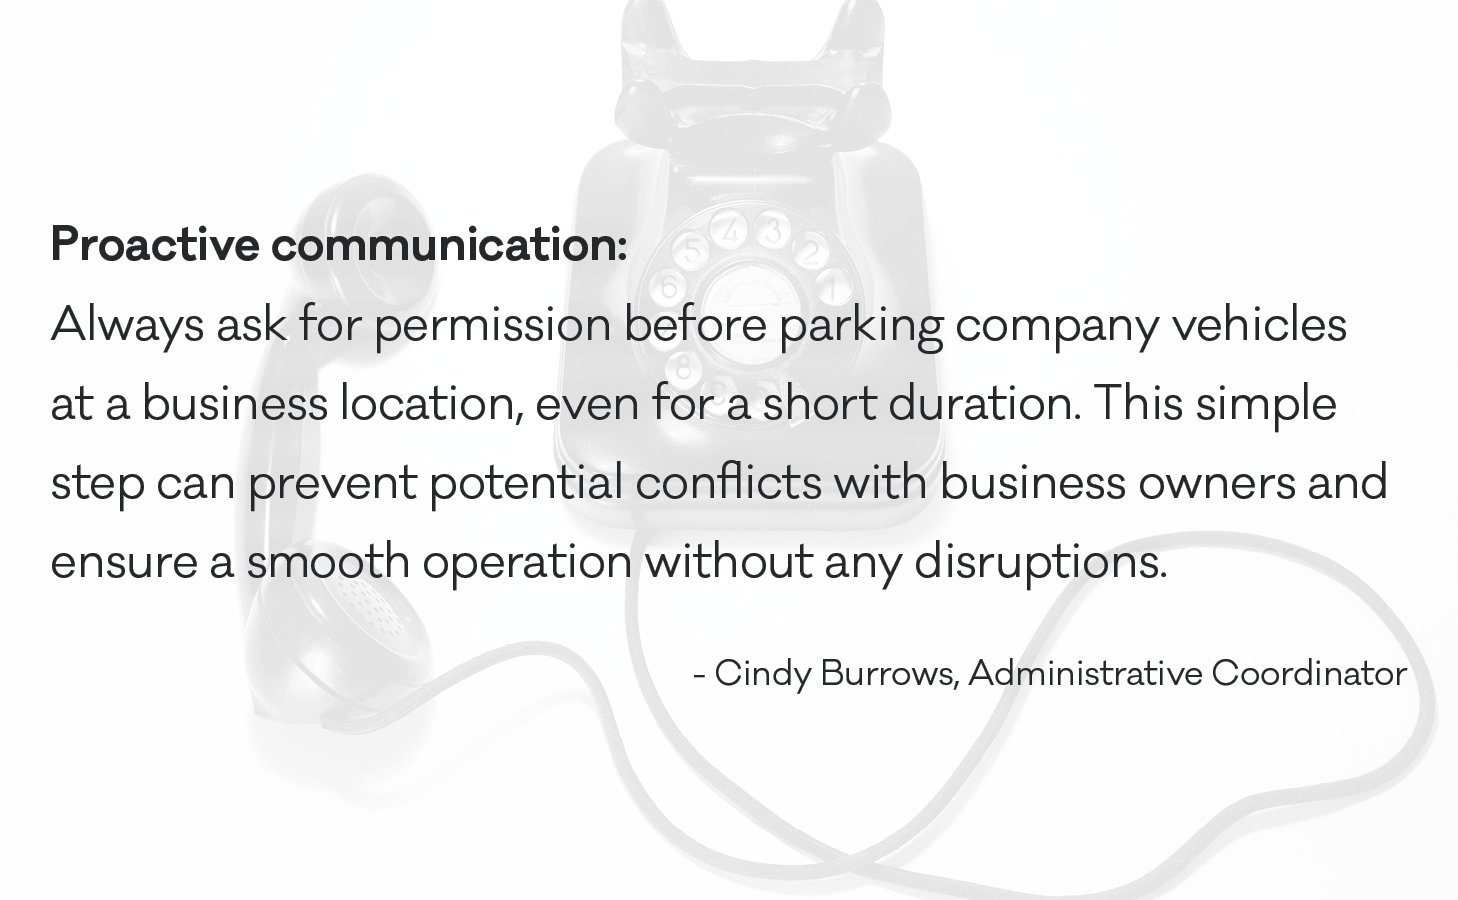 Always ask for permission before parking company vehicles at a business location, even for a short duration. This simple step can prevent potential conflicts with business owners and ensure a smooth operation without any disruptions.